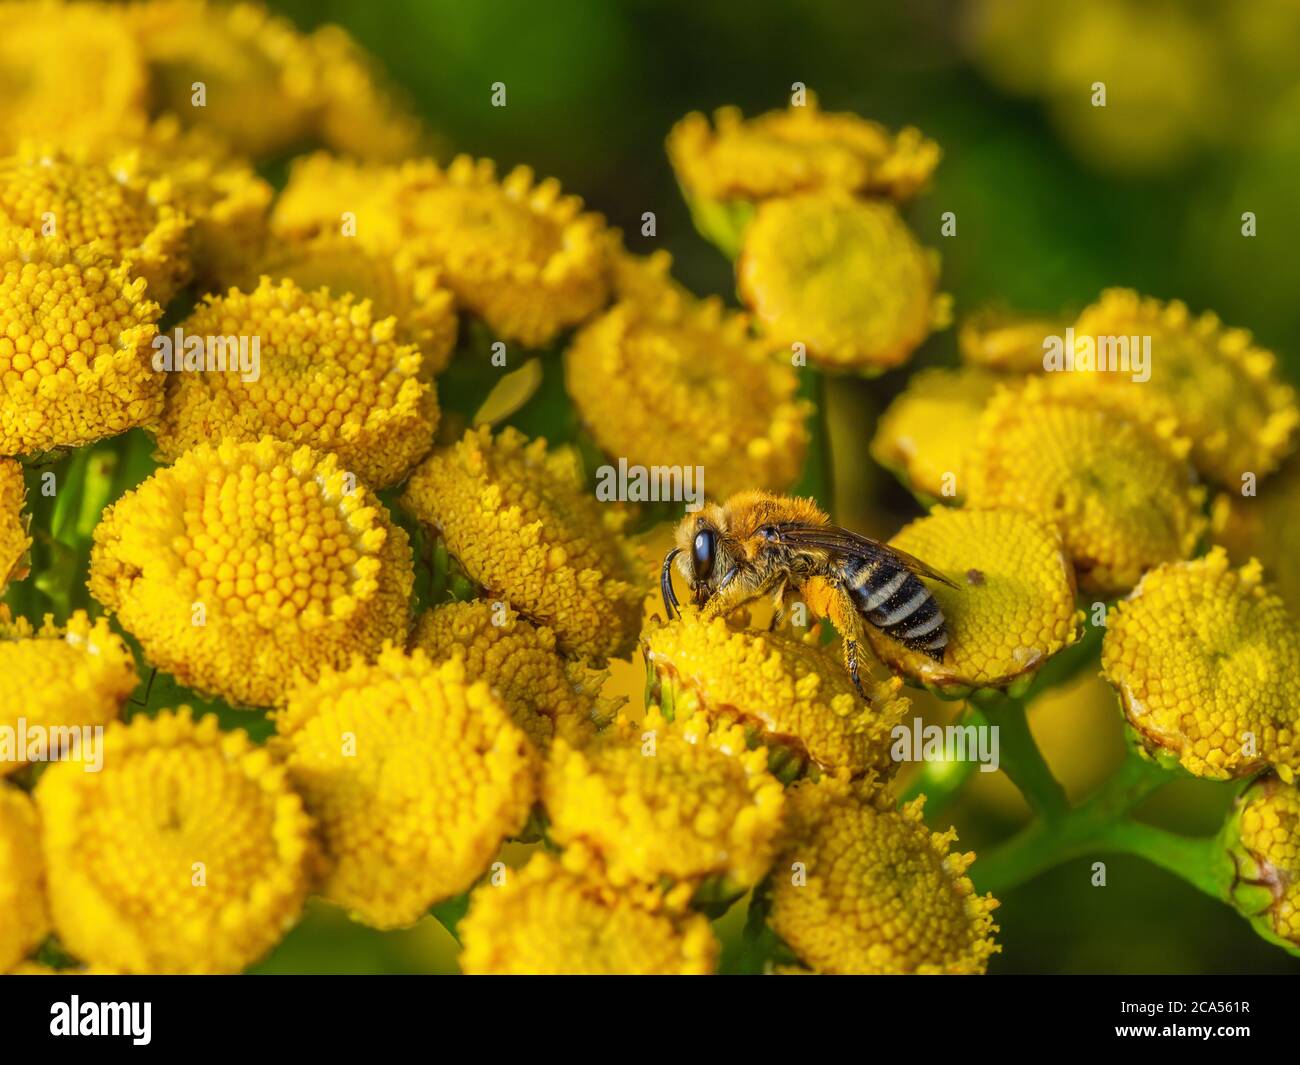 Close-up of western honey bee collecting nectar from common tansy flowers (Tanacetum vulgare). Visible how pollen grains stick to bee's body. Stock Photo